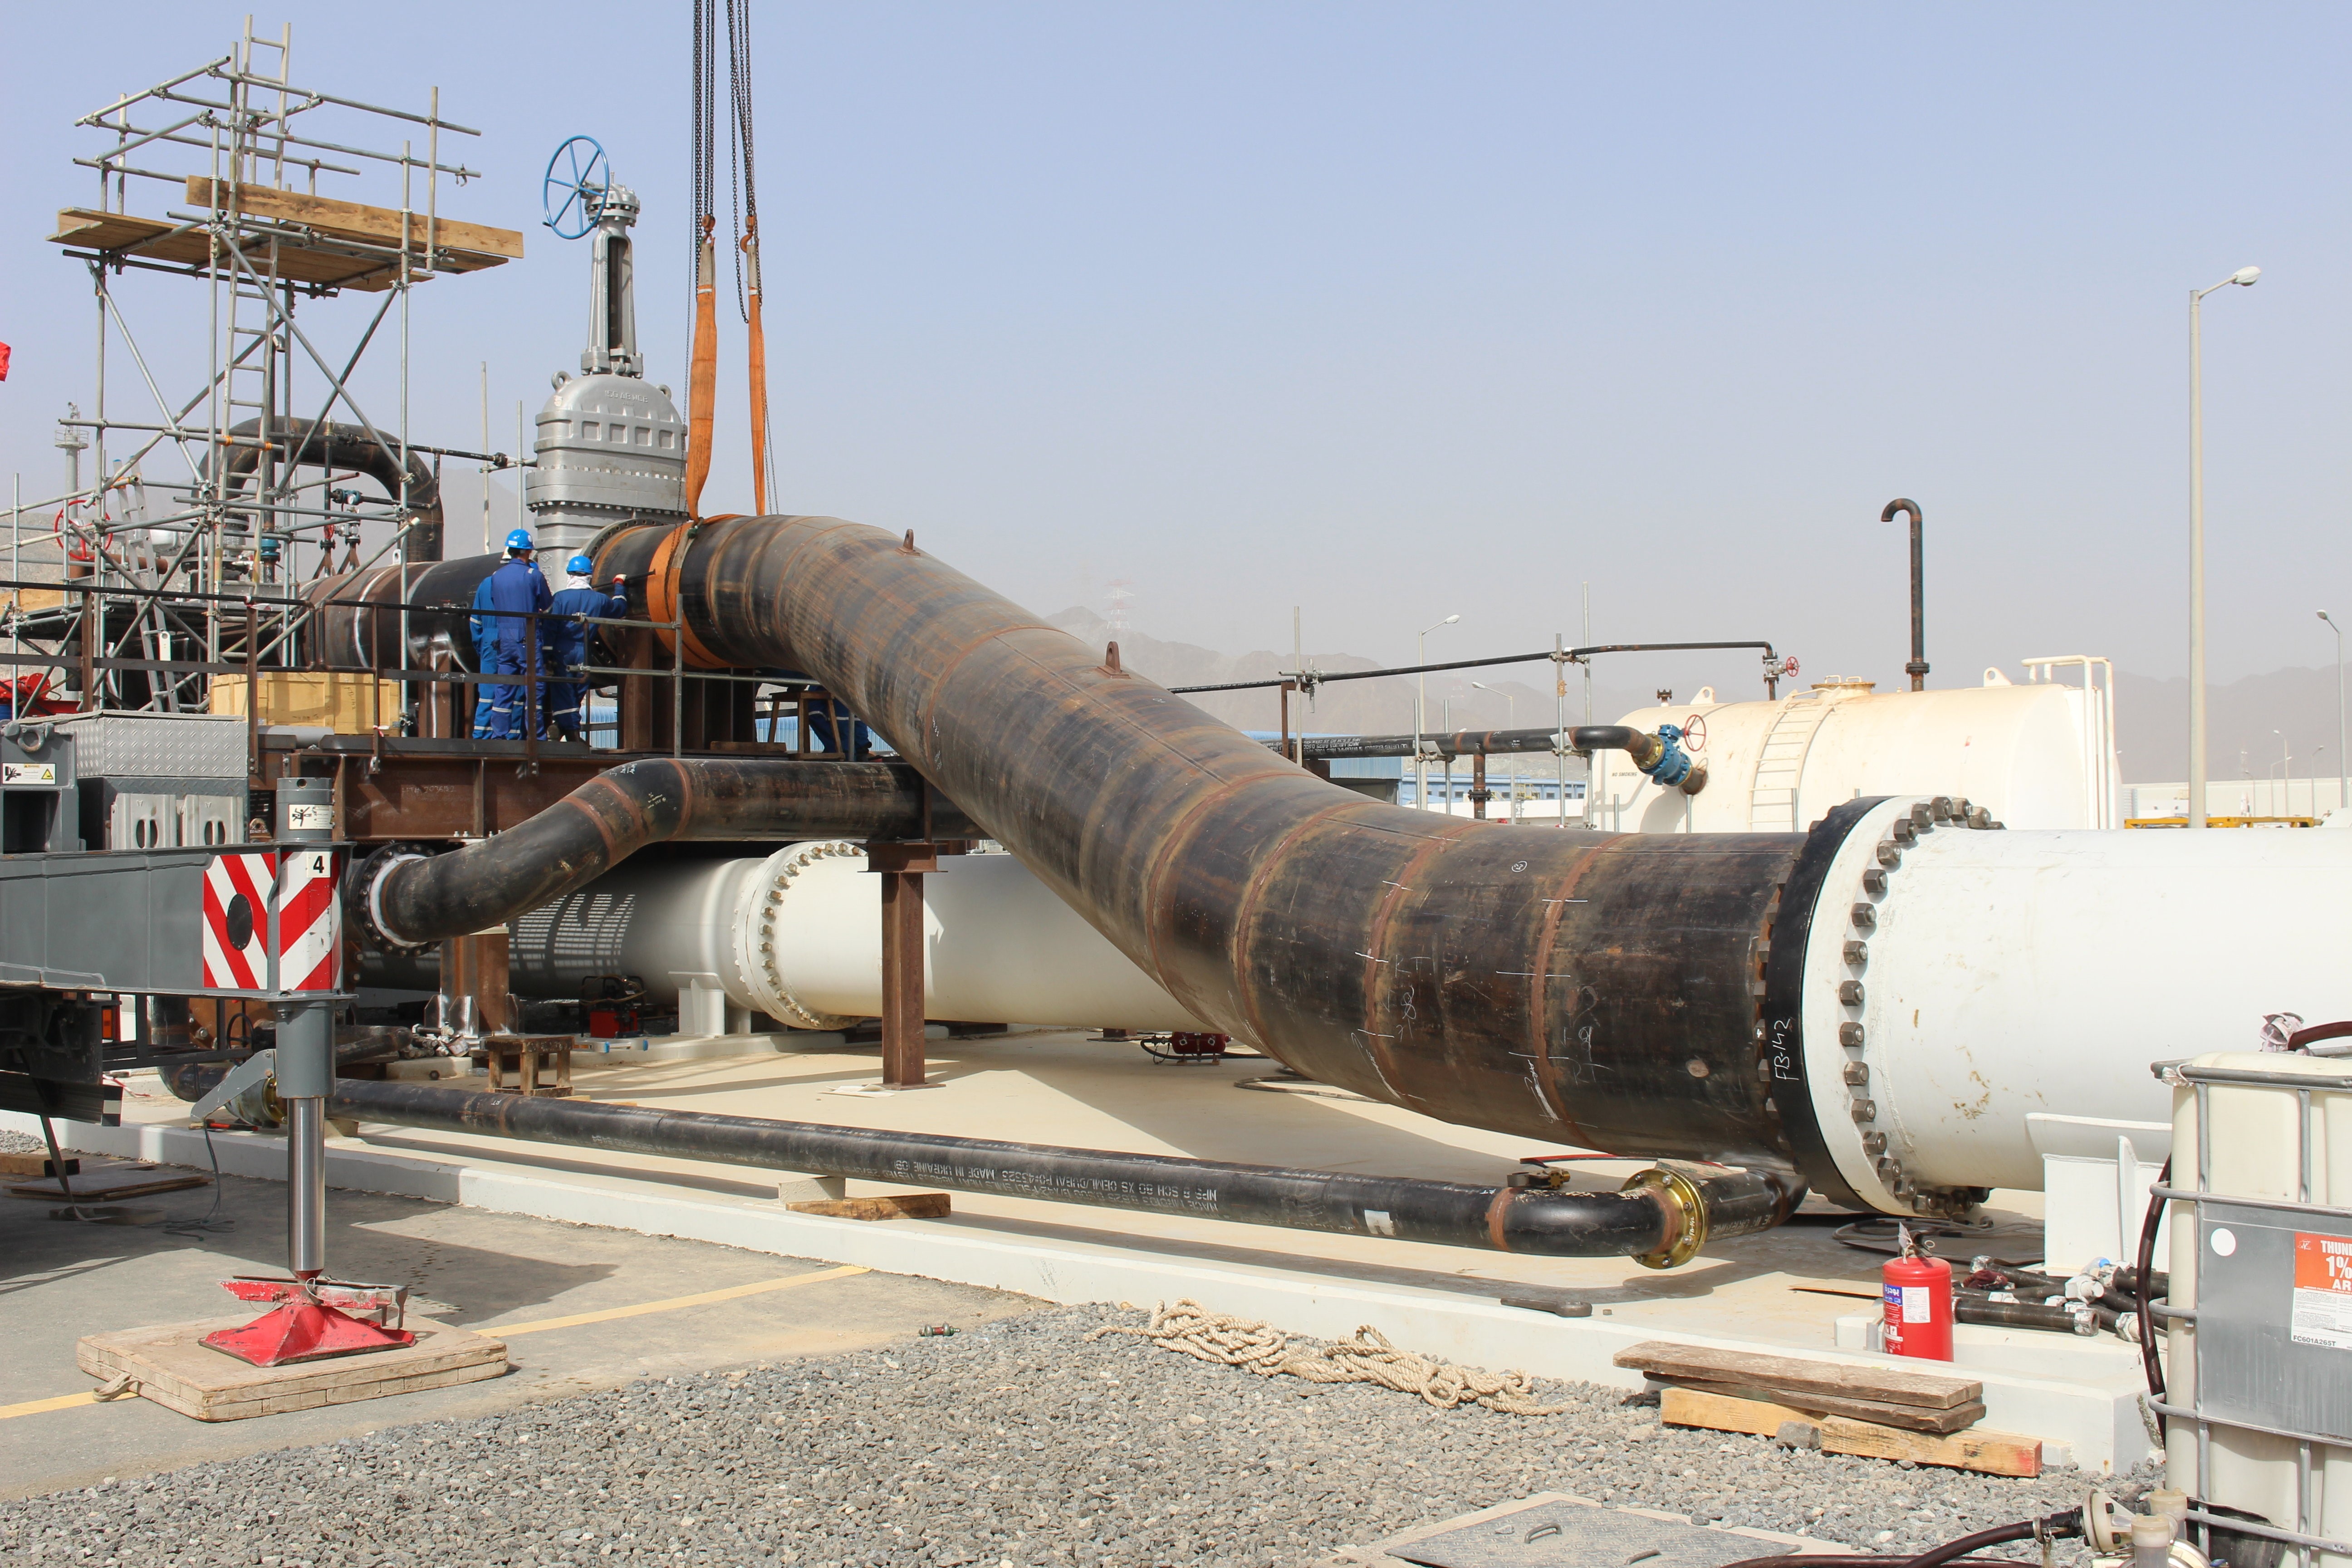 Successful inspection of unpiggable loading lines using ILI technology in the UAE